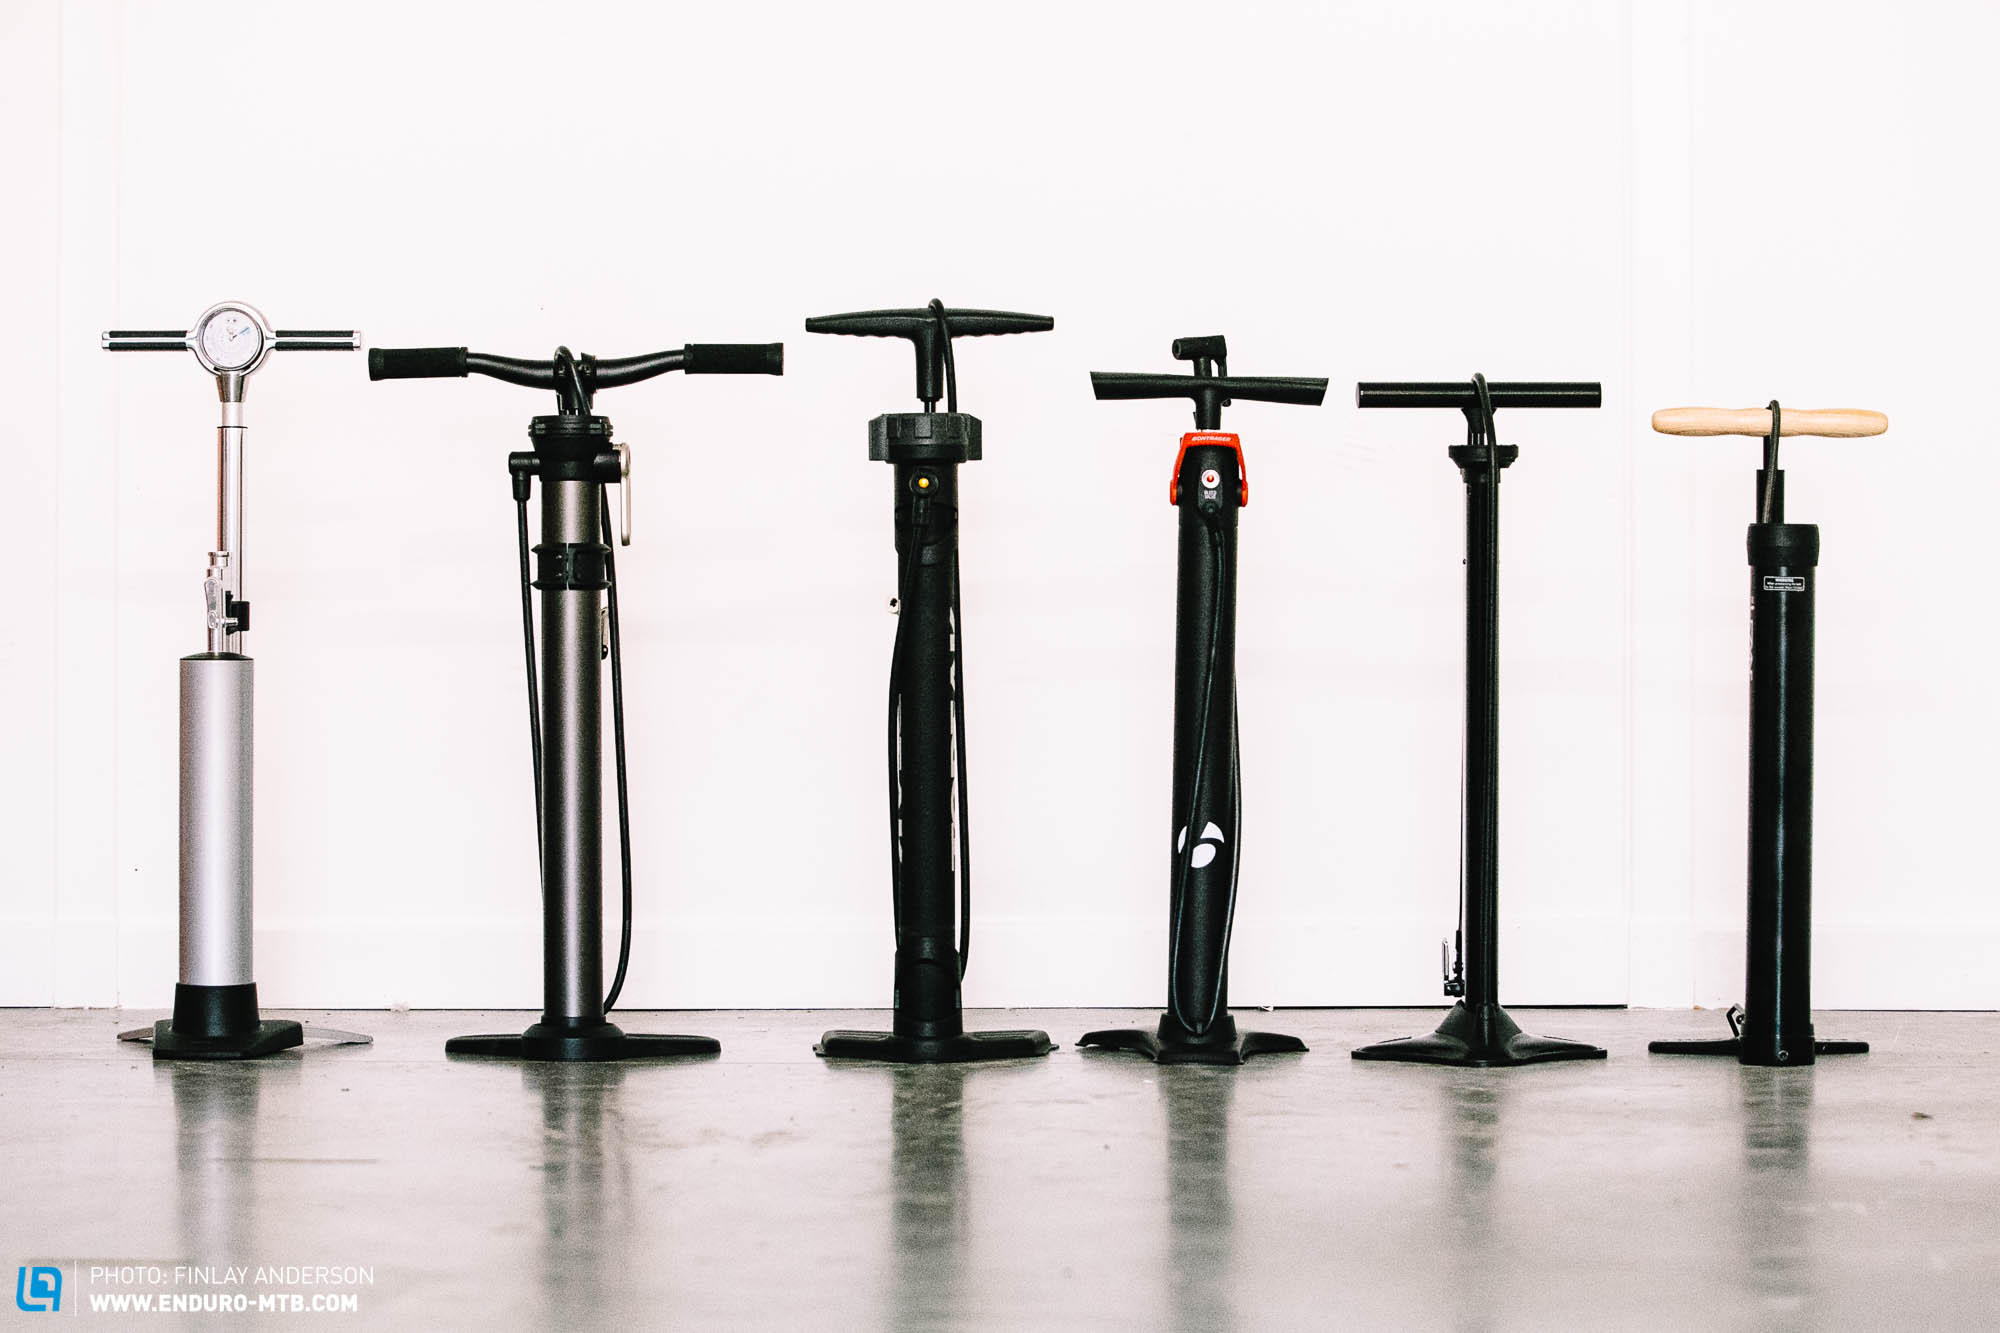 The Best Bike Pumps for Every Type of Rider